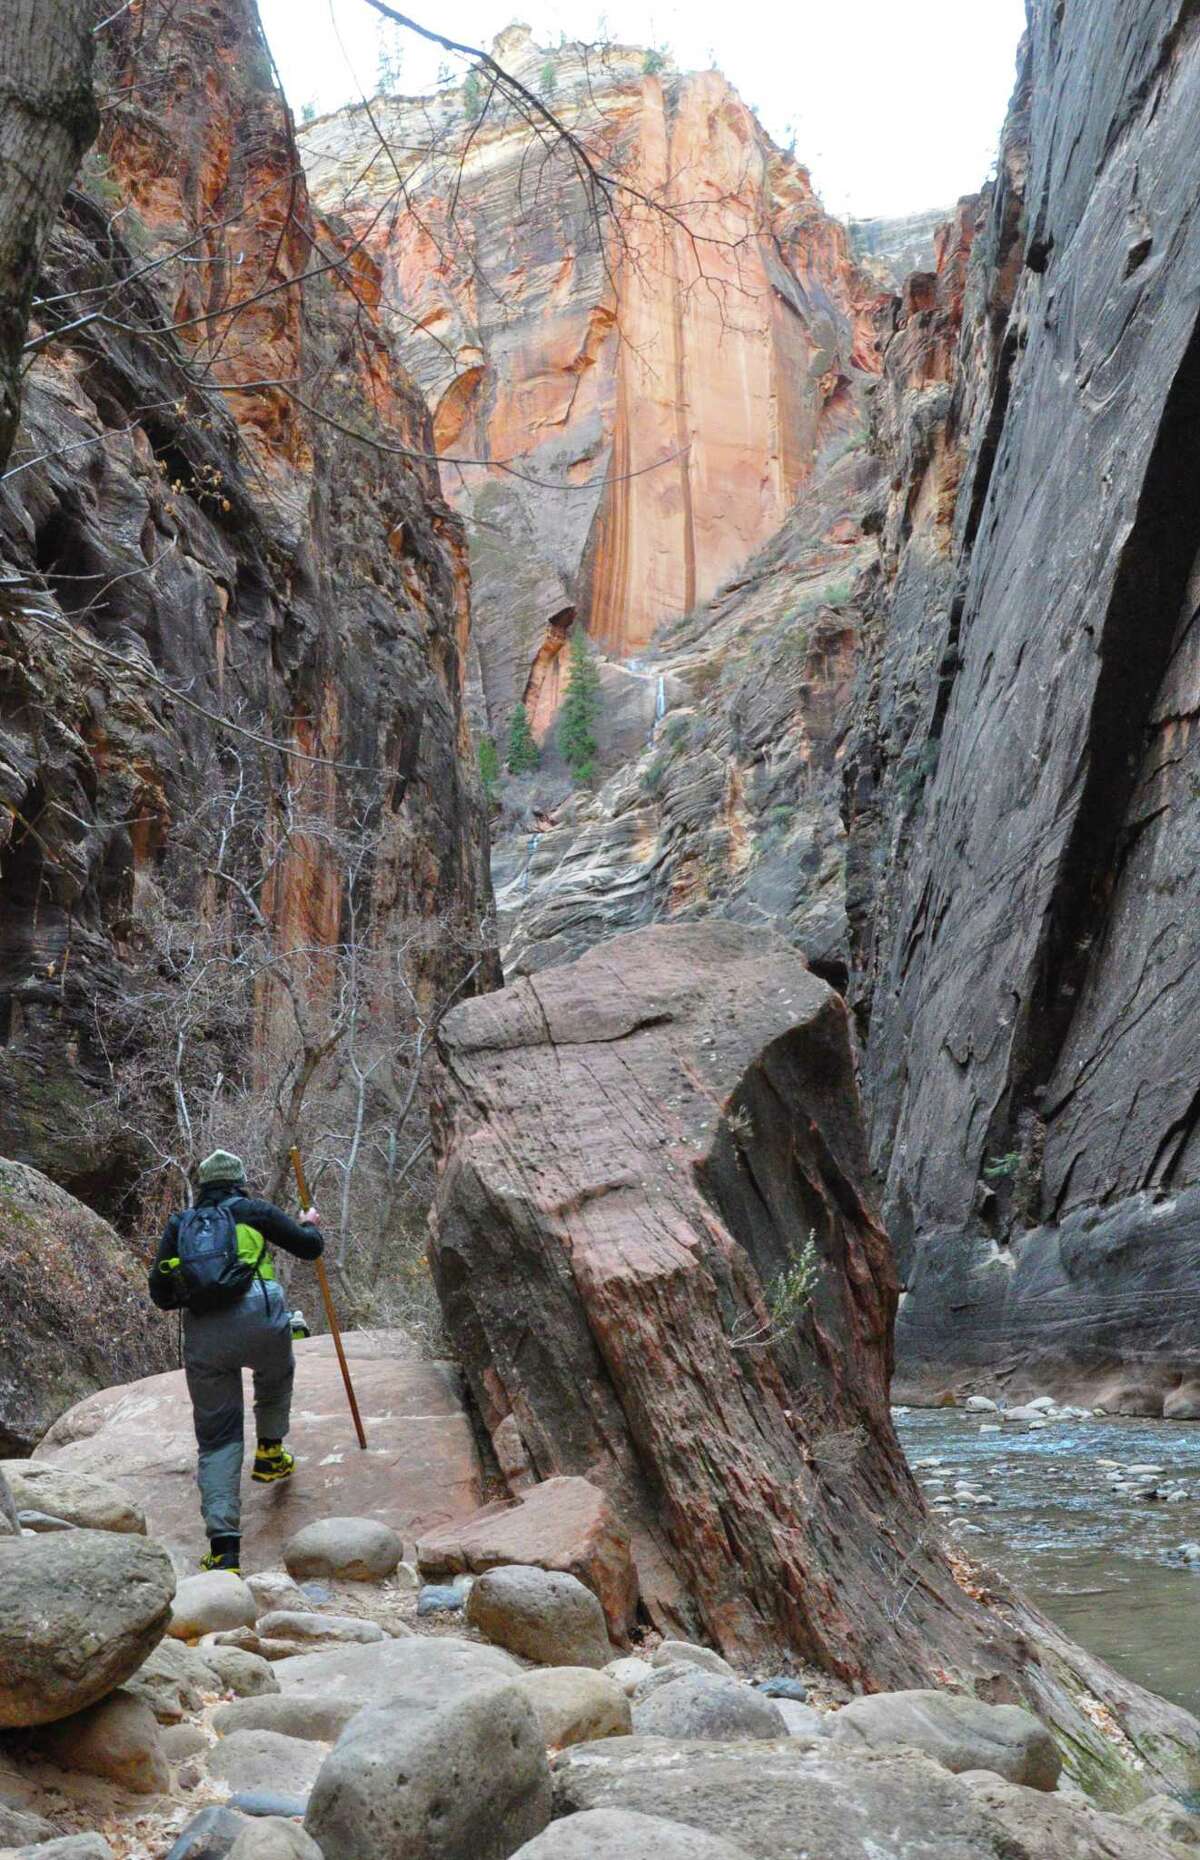 Zoe Gutterman surveys the trail through The Narrows in Zion National Park.